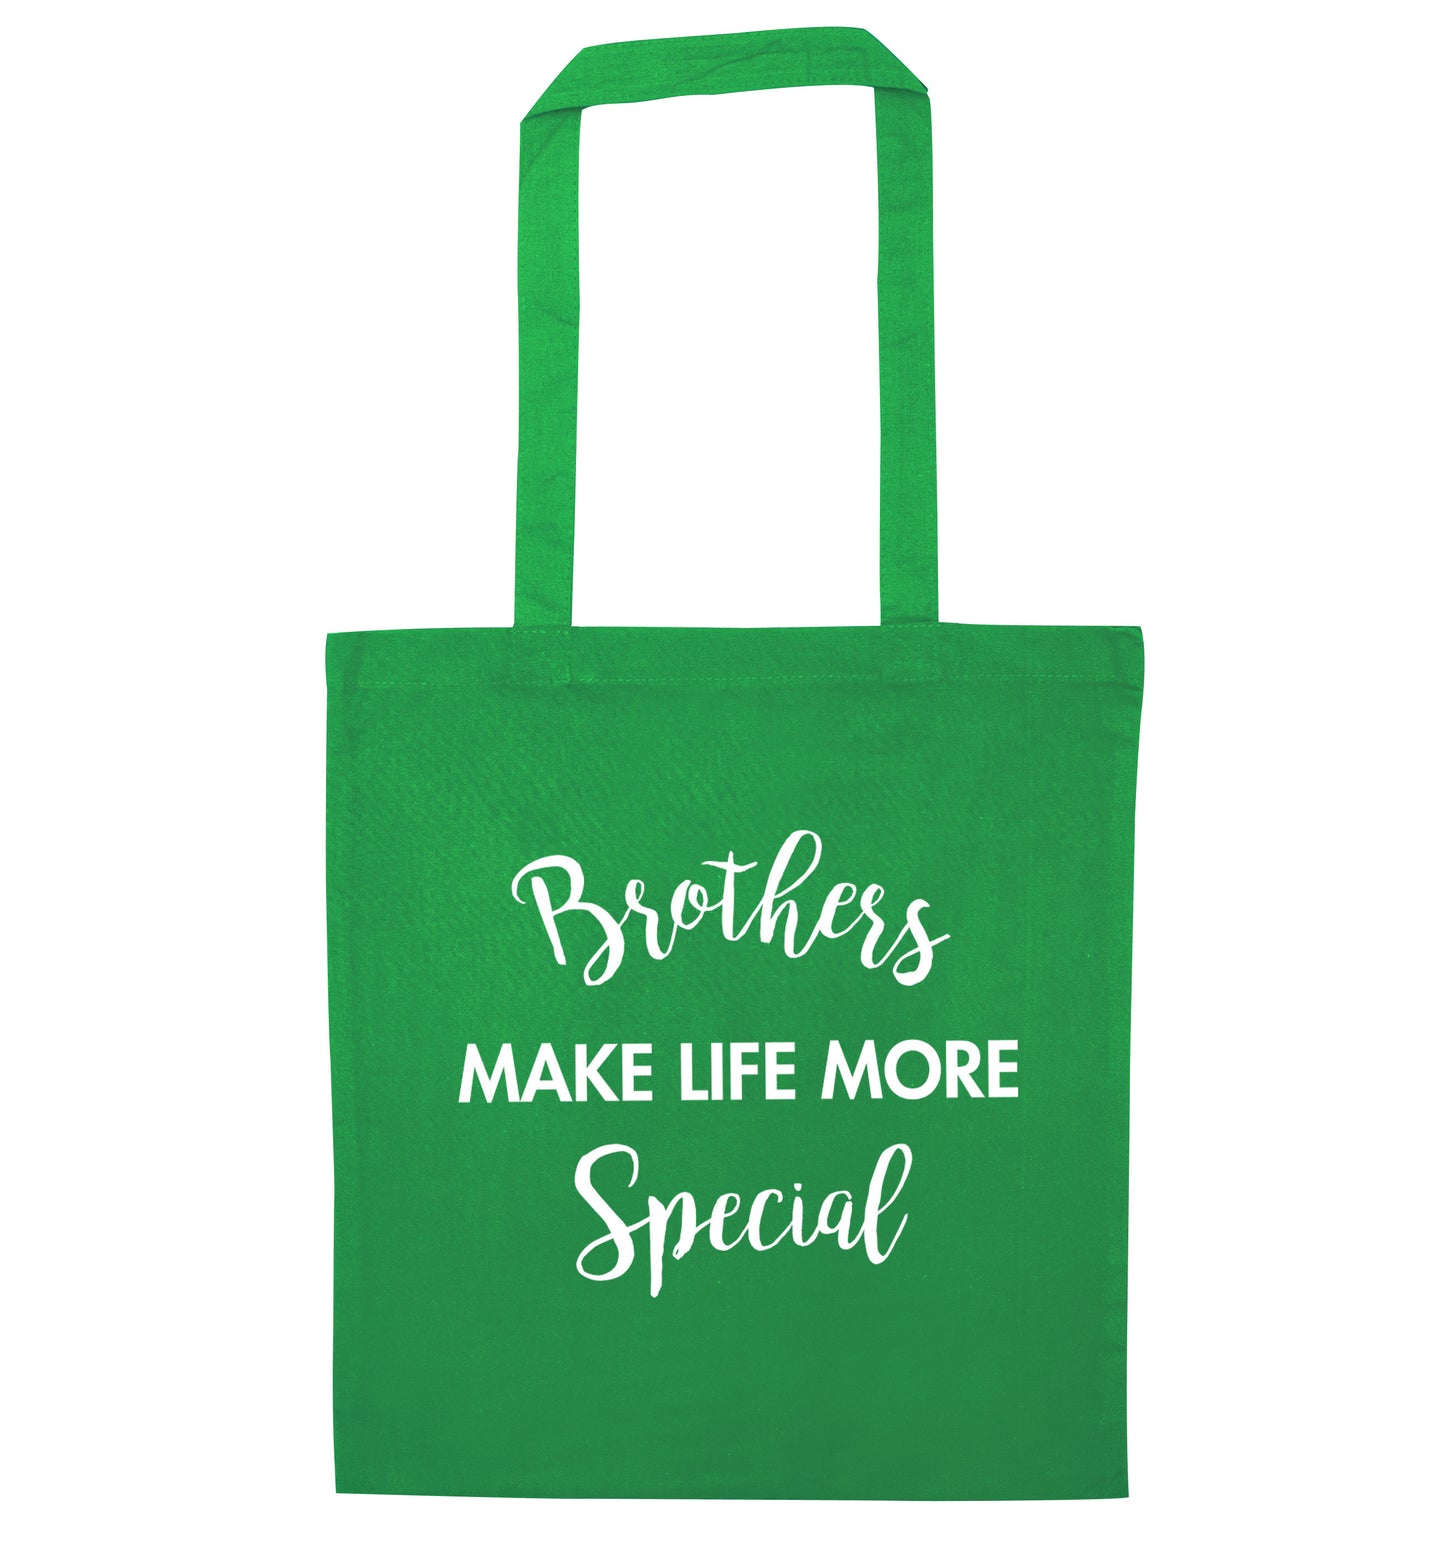 Brothers make life more special green tote bag